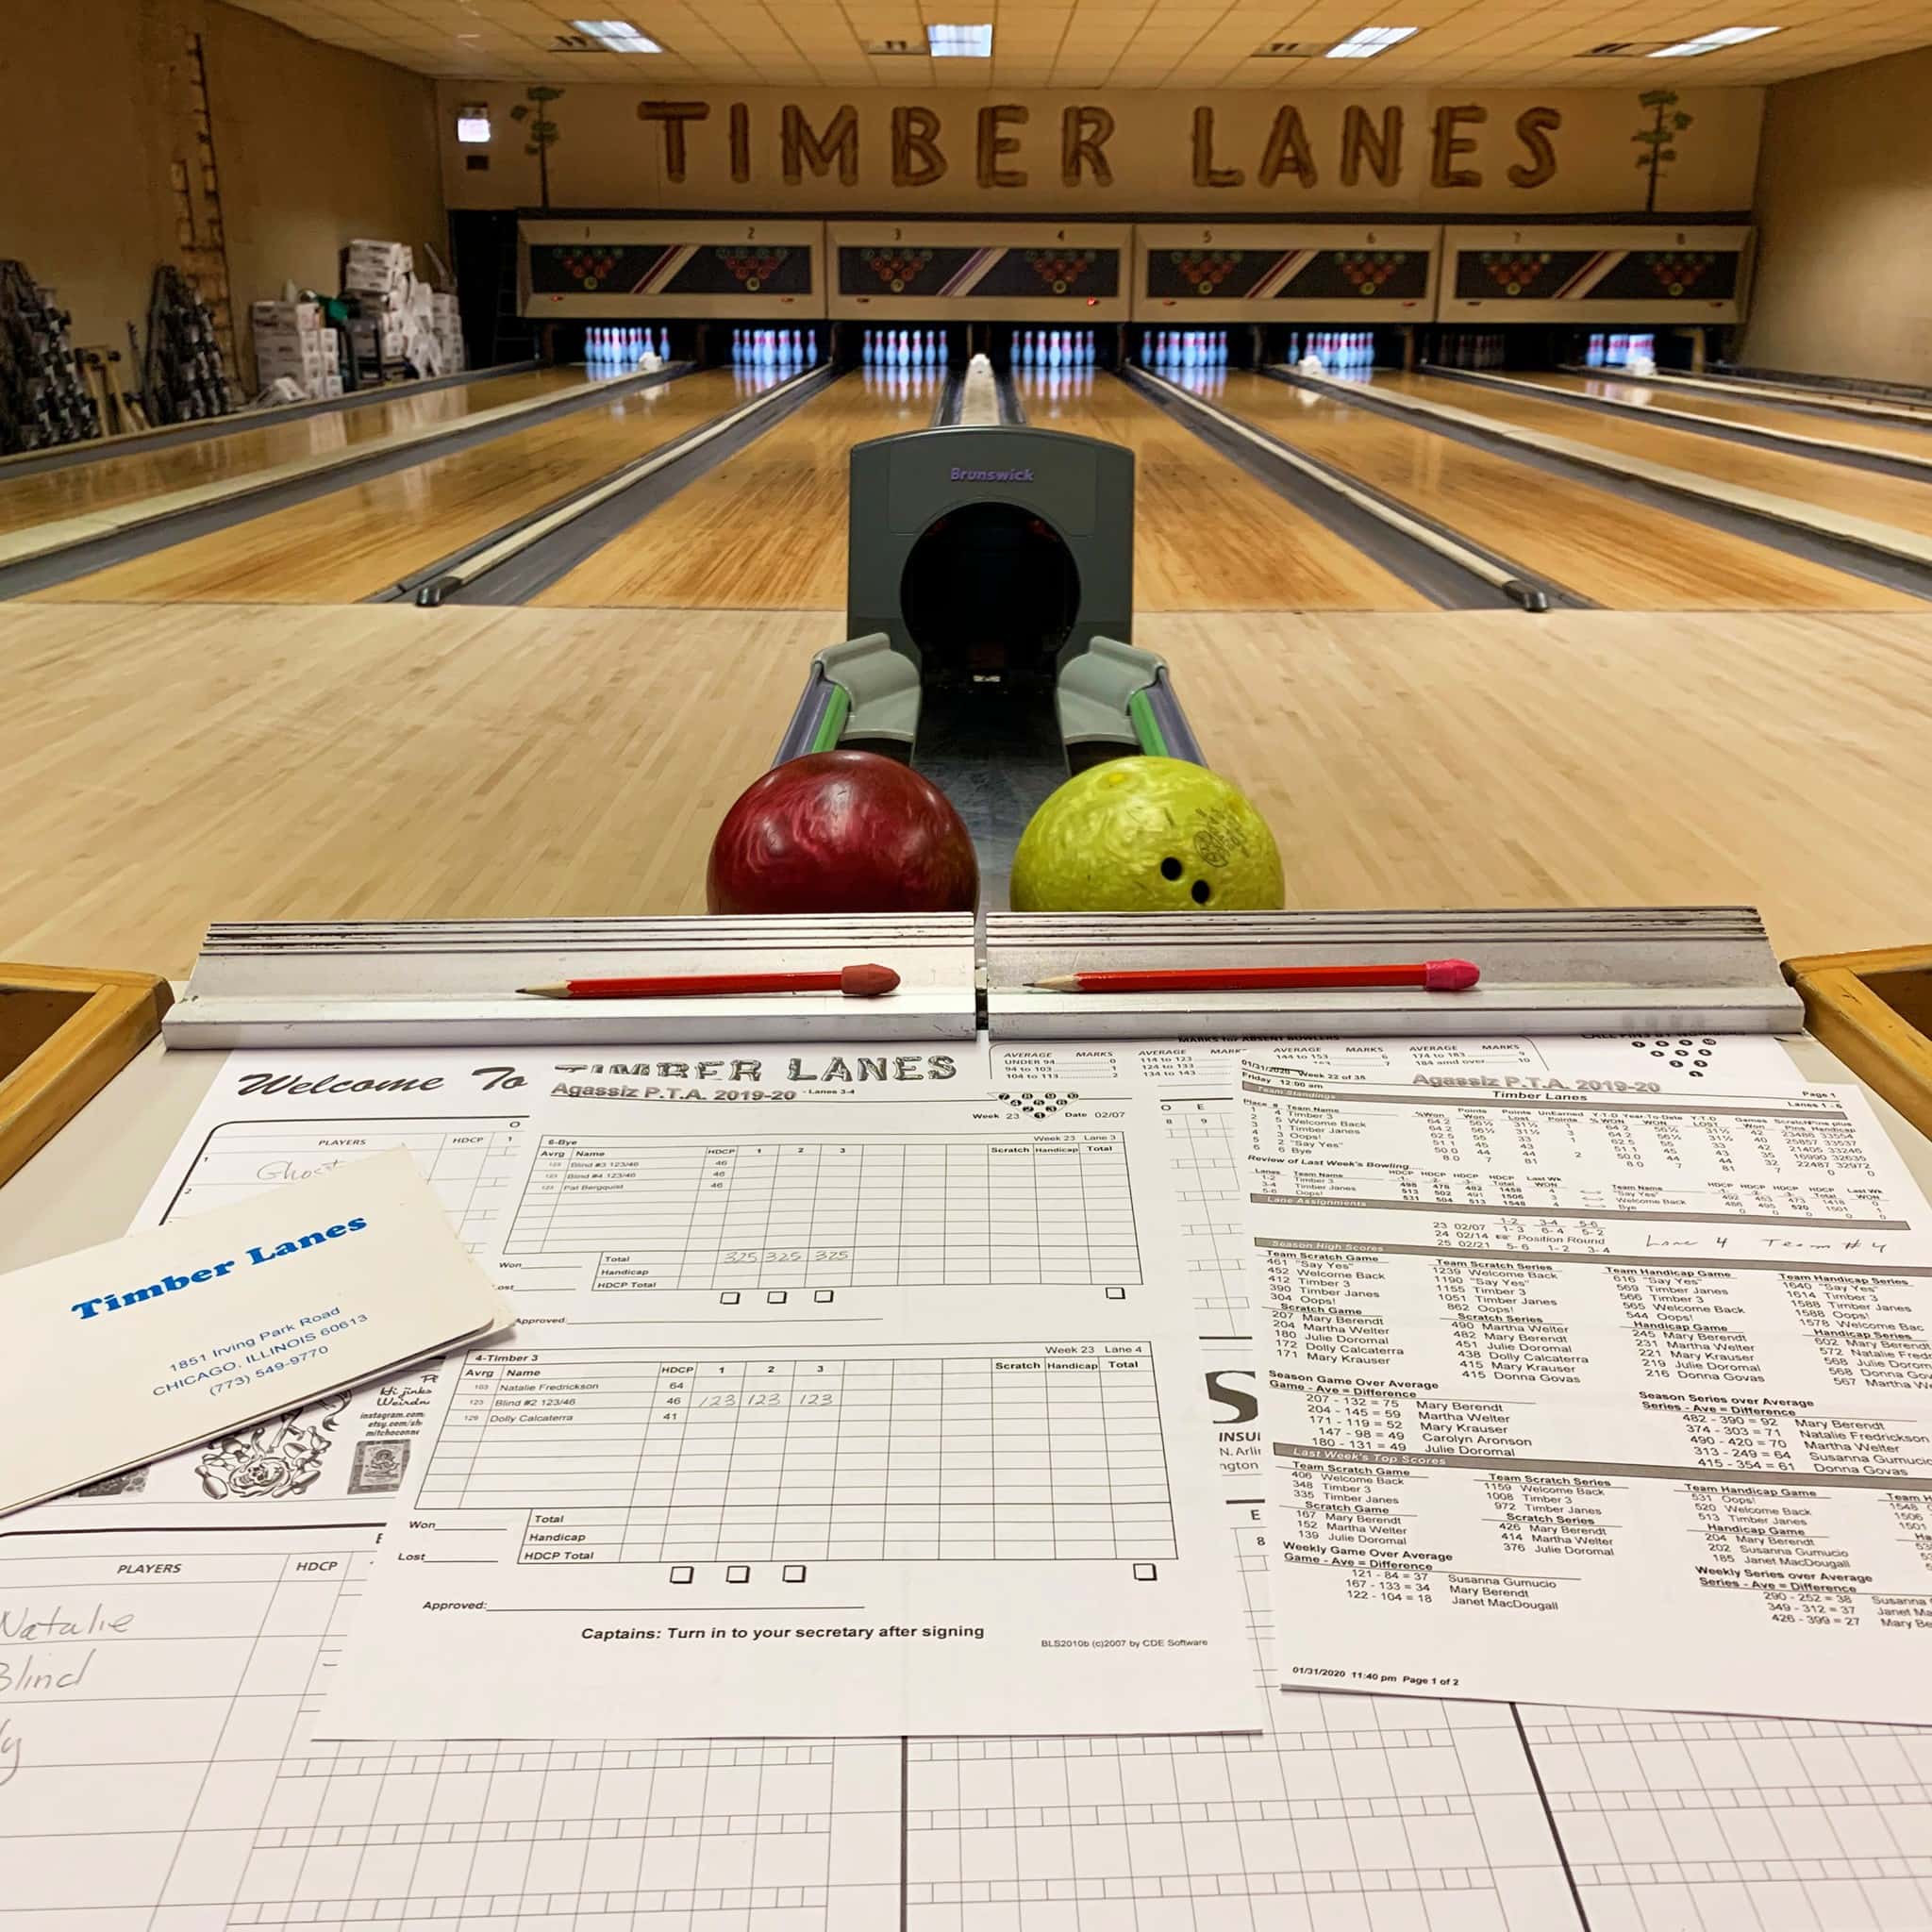 image of timber lanes bowling alley